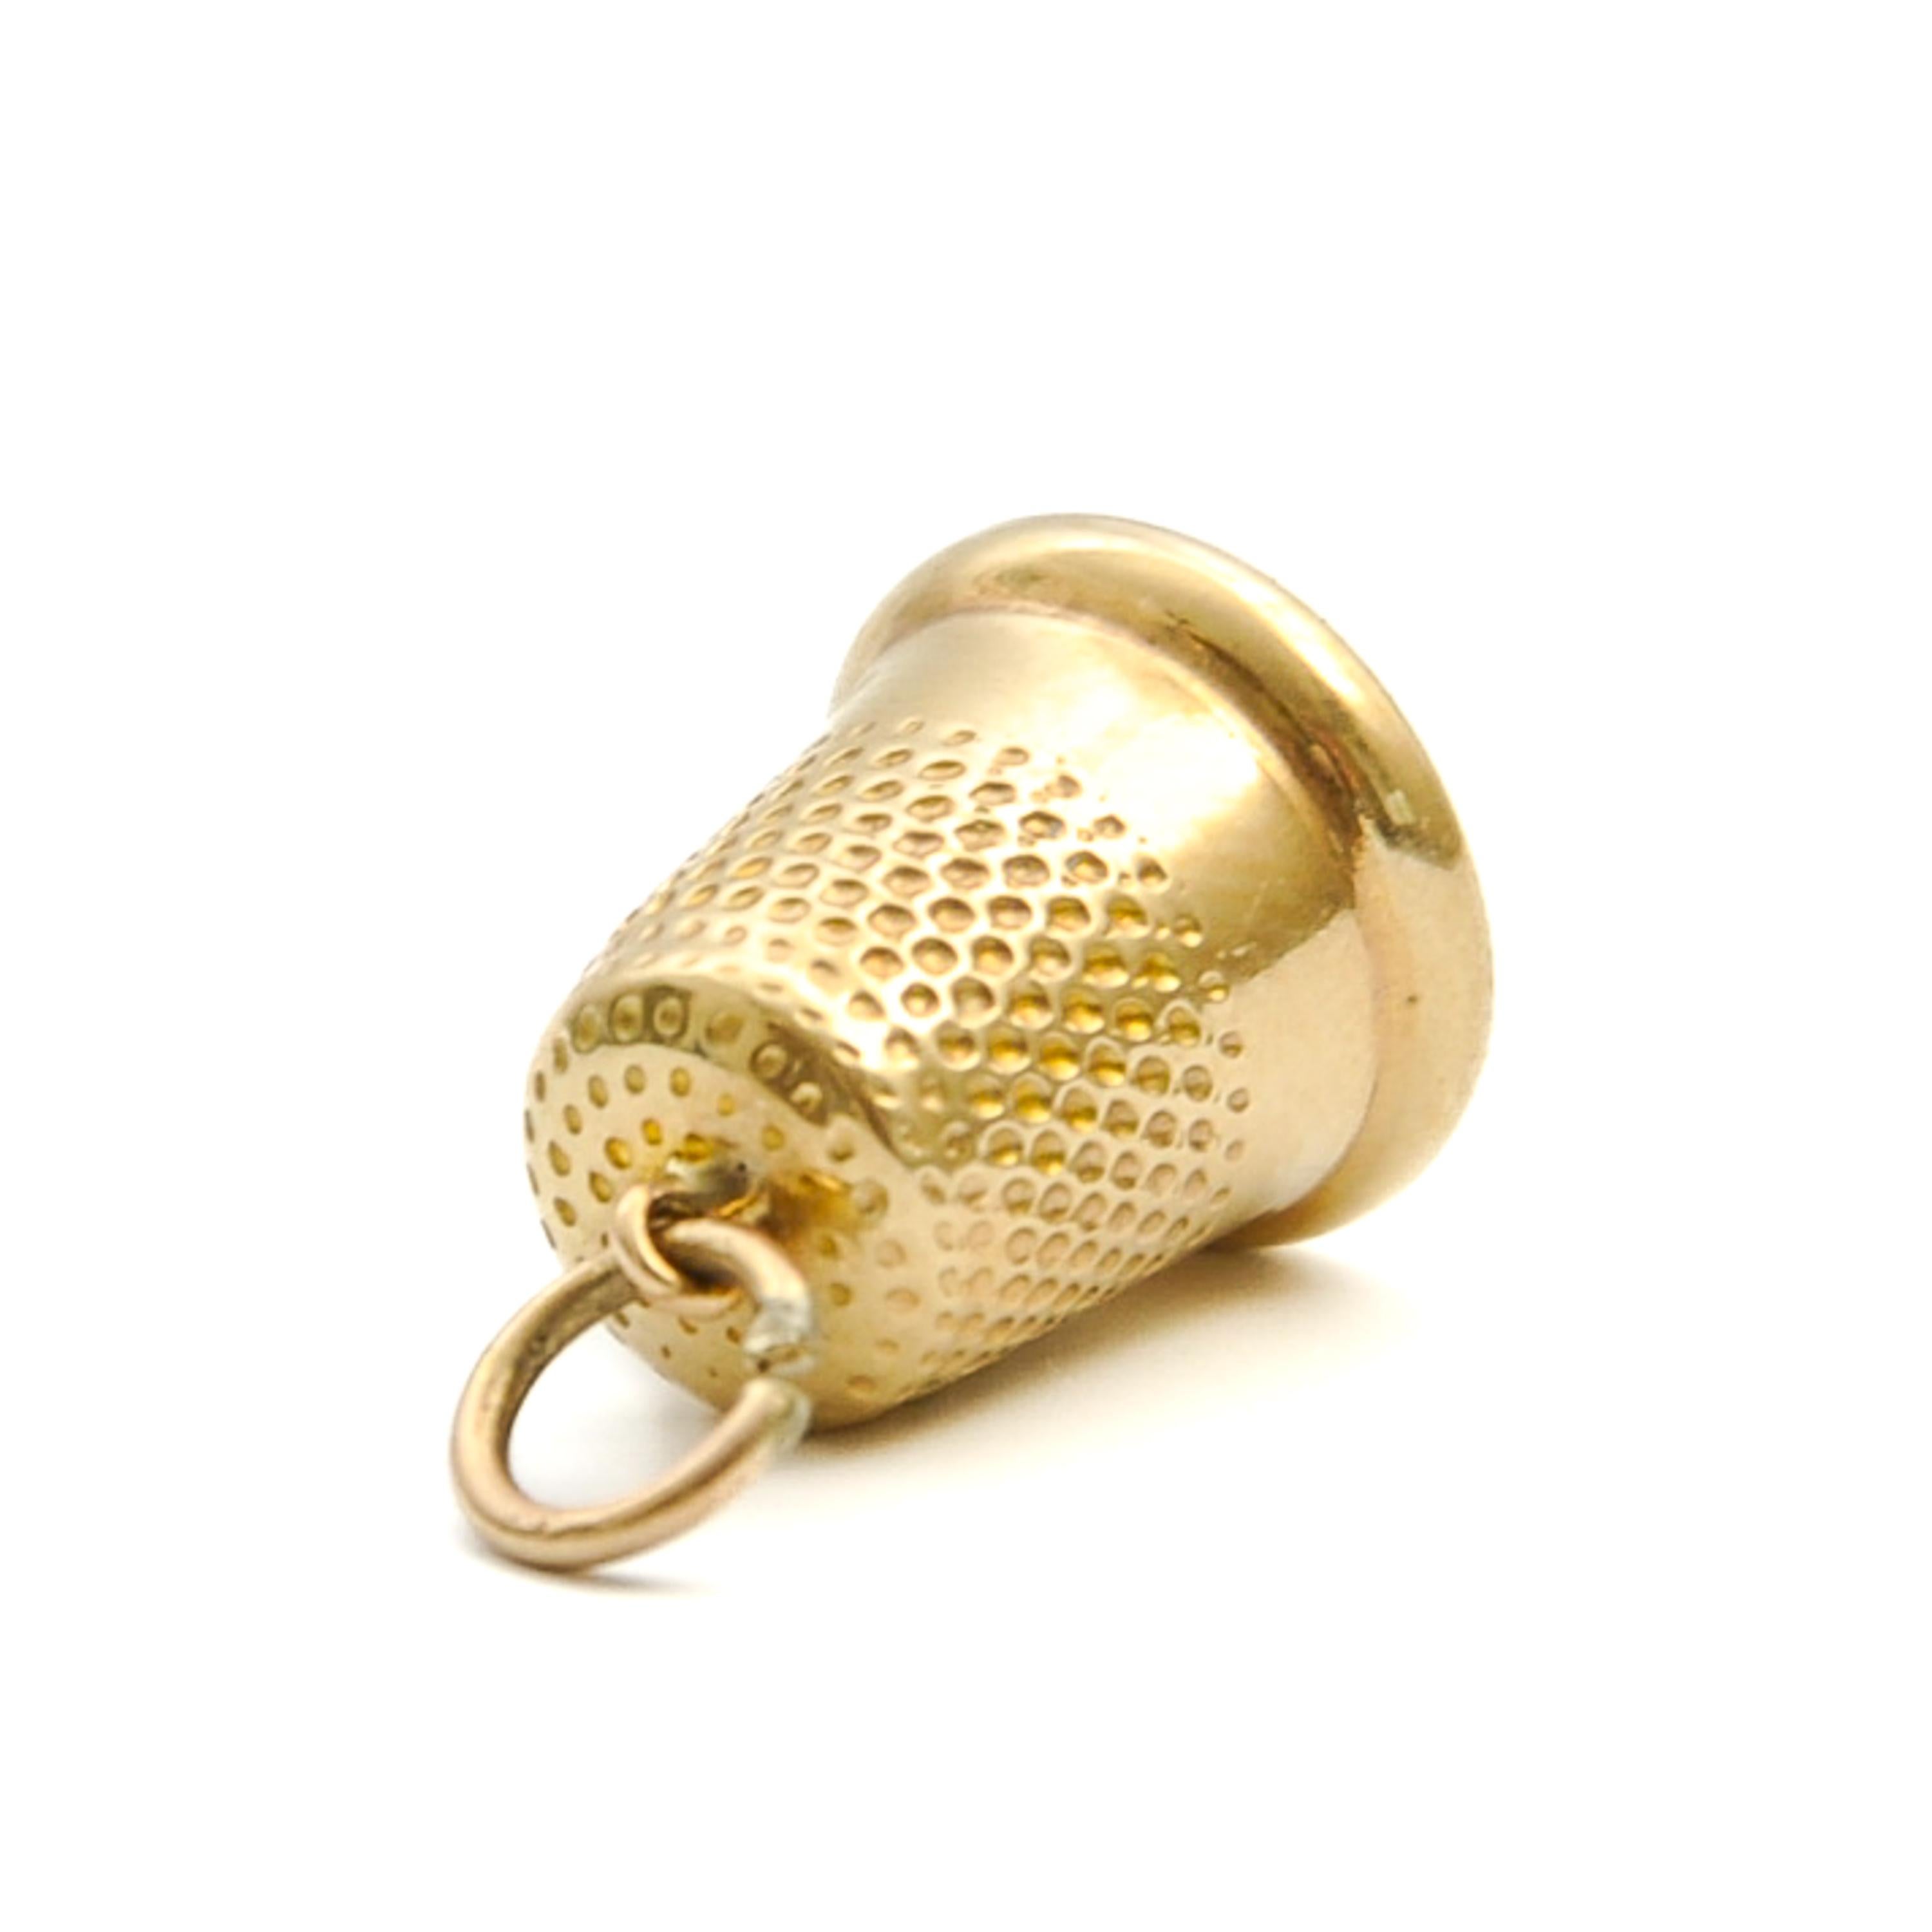 Vintage 9K Gold Thimble Charm Pendant In Good Condition For Sale In Rotterdam, NL